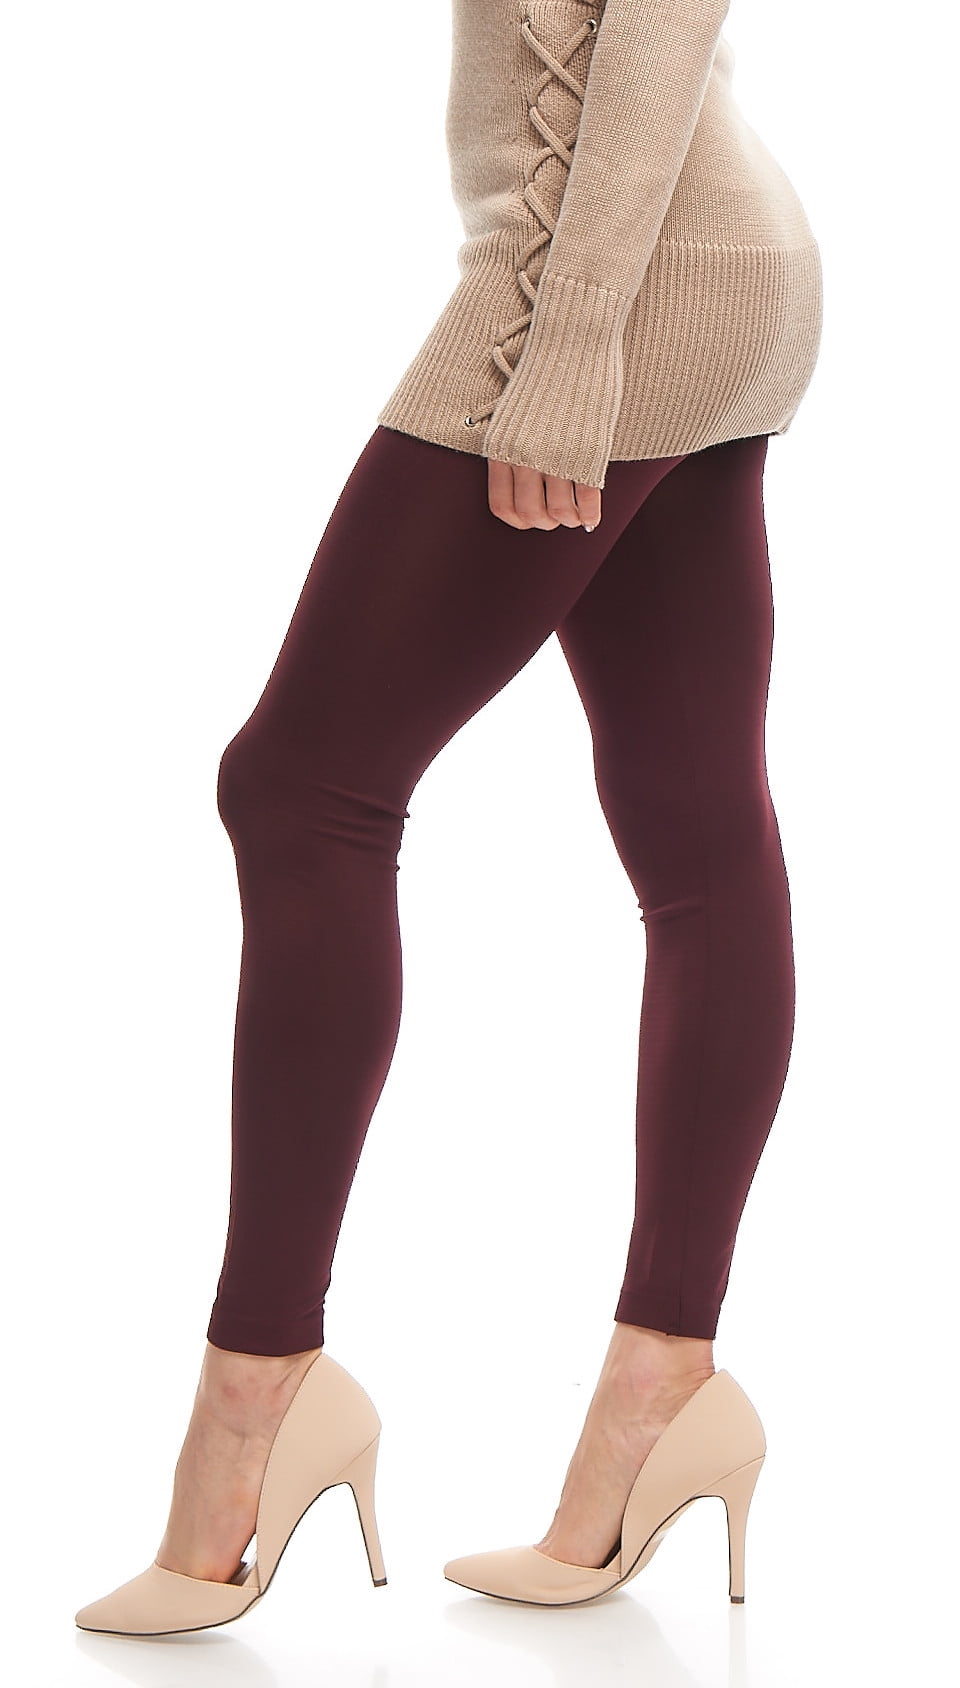 LMB Lush Moda Capri Length Footless Tights Leggings for Women, Variety of  Colors, One Size fits Most (XS -XL) - Wild Berry